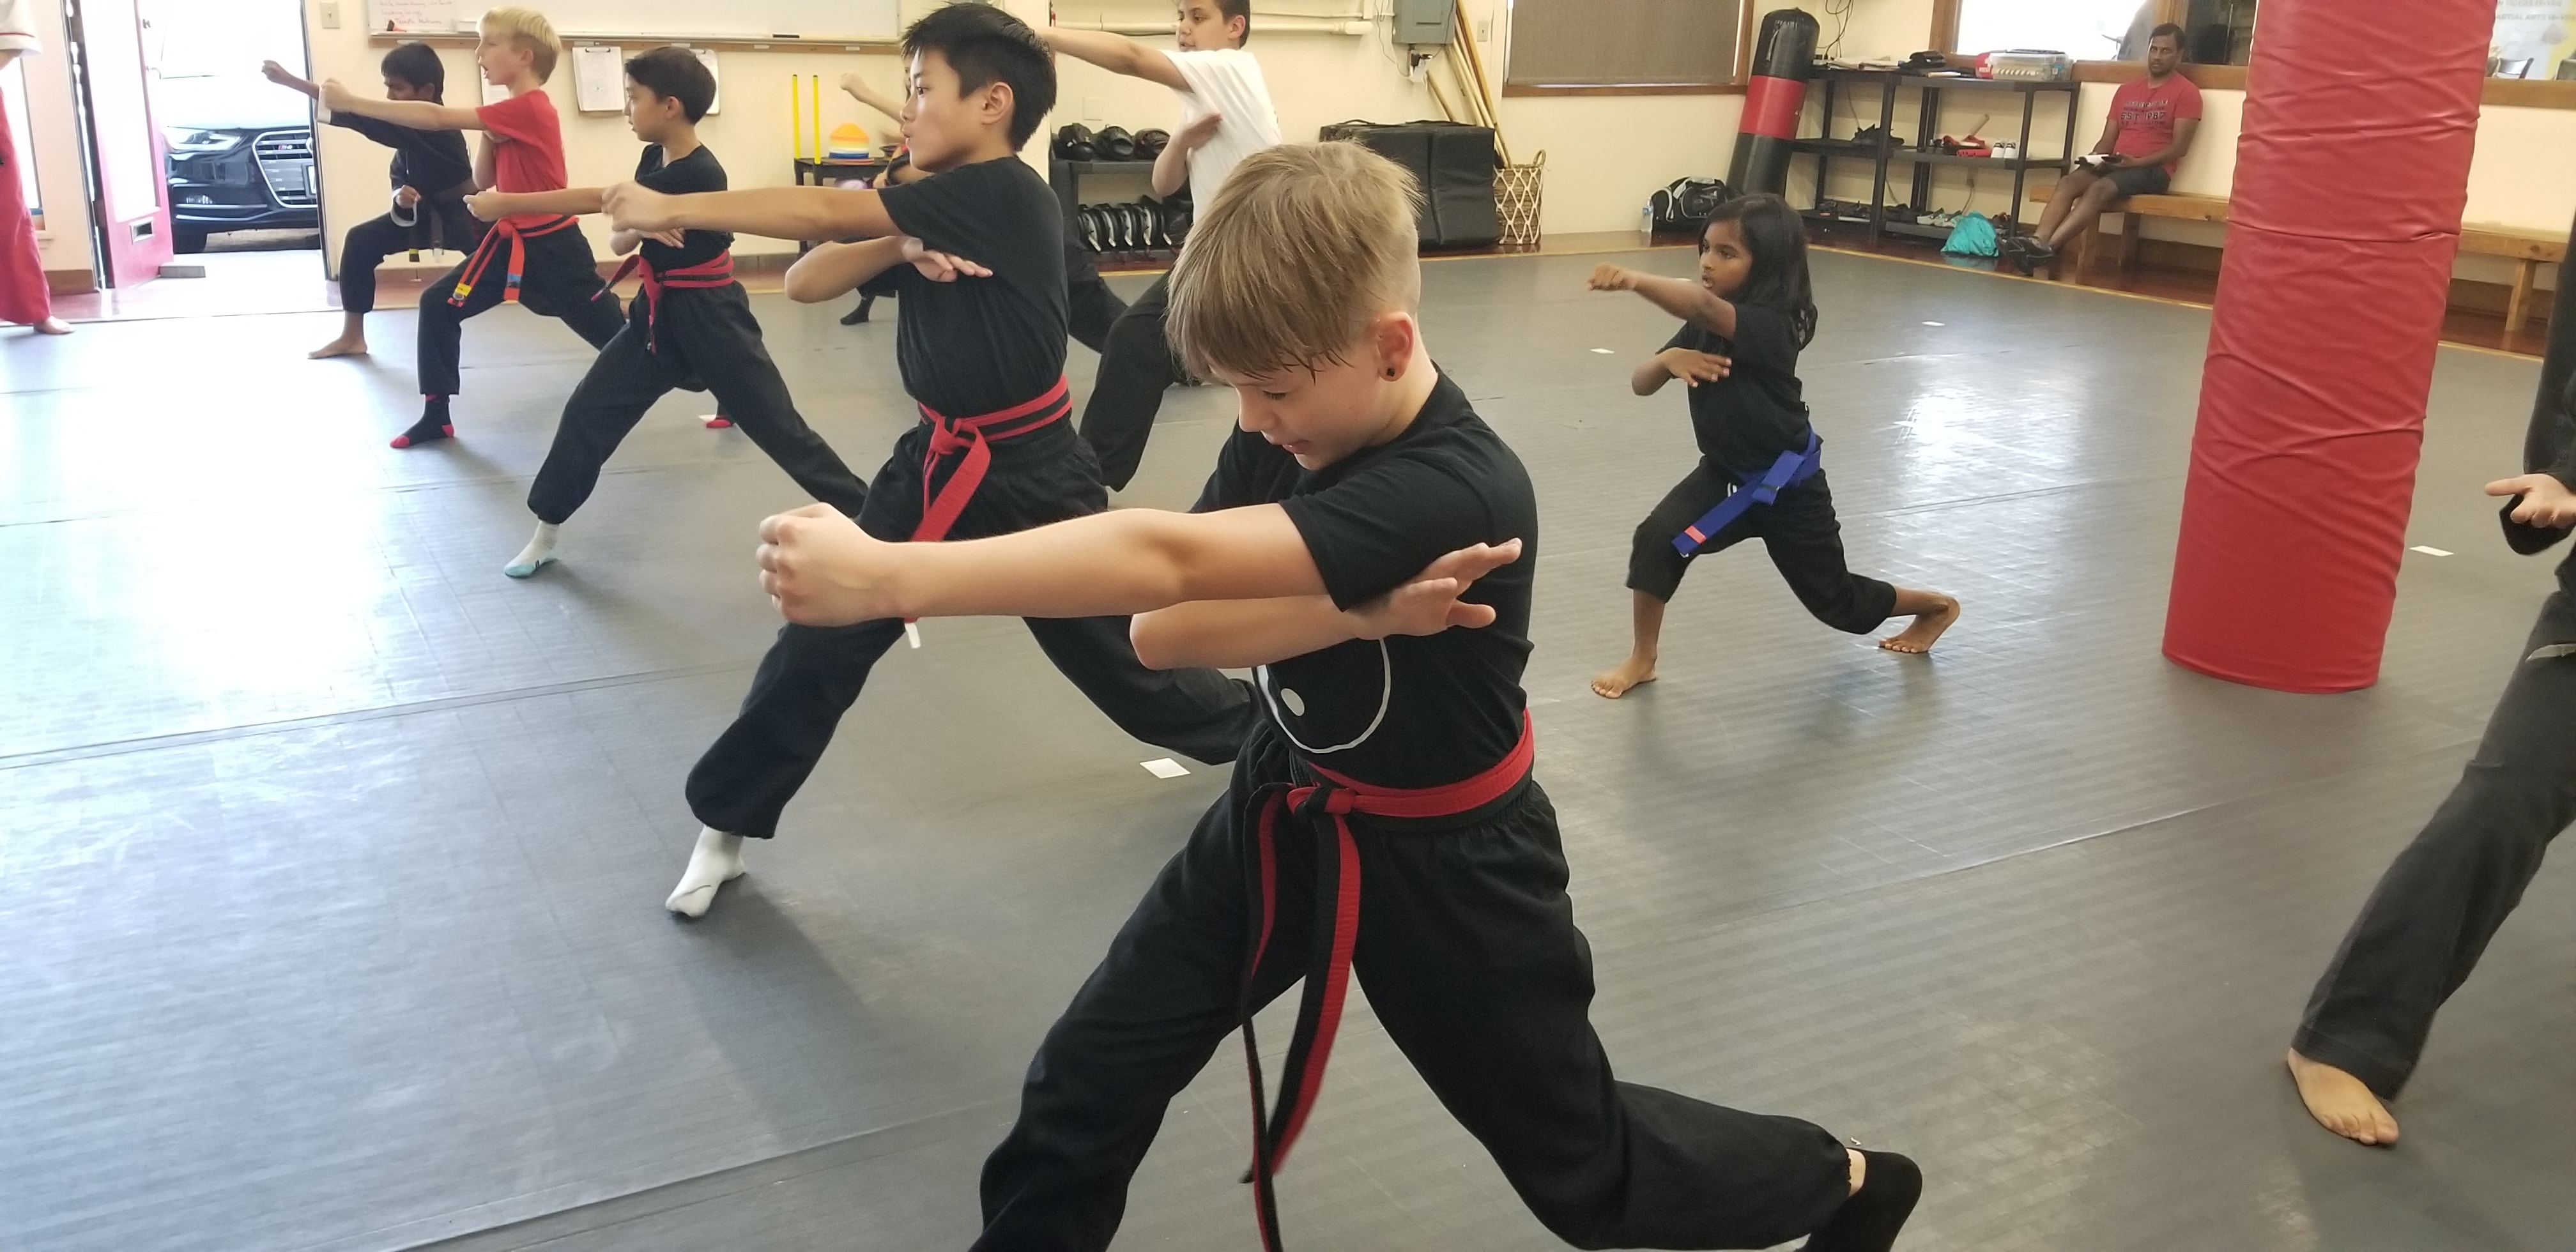 kids doing karate is a class at the academy of kempo martial arts image